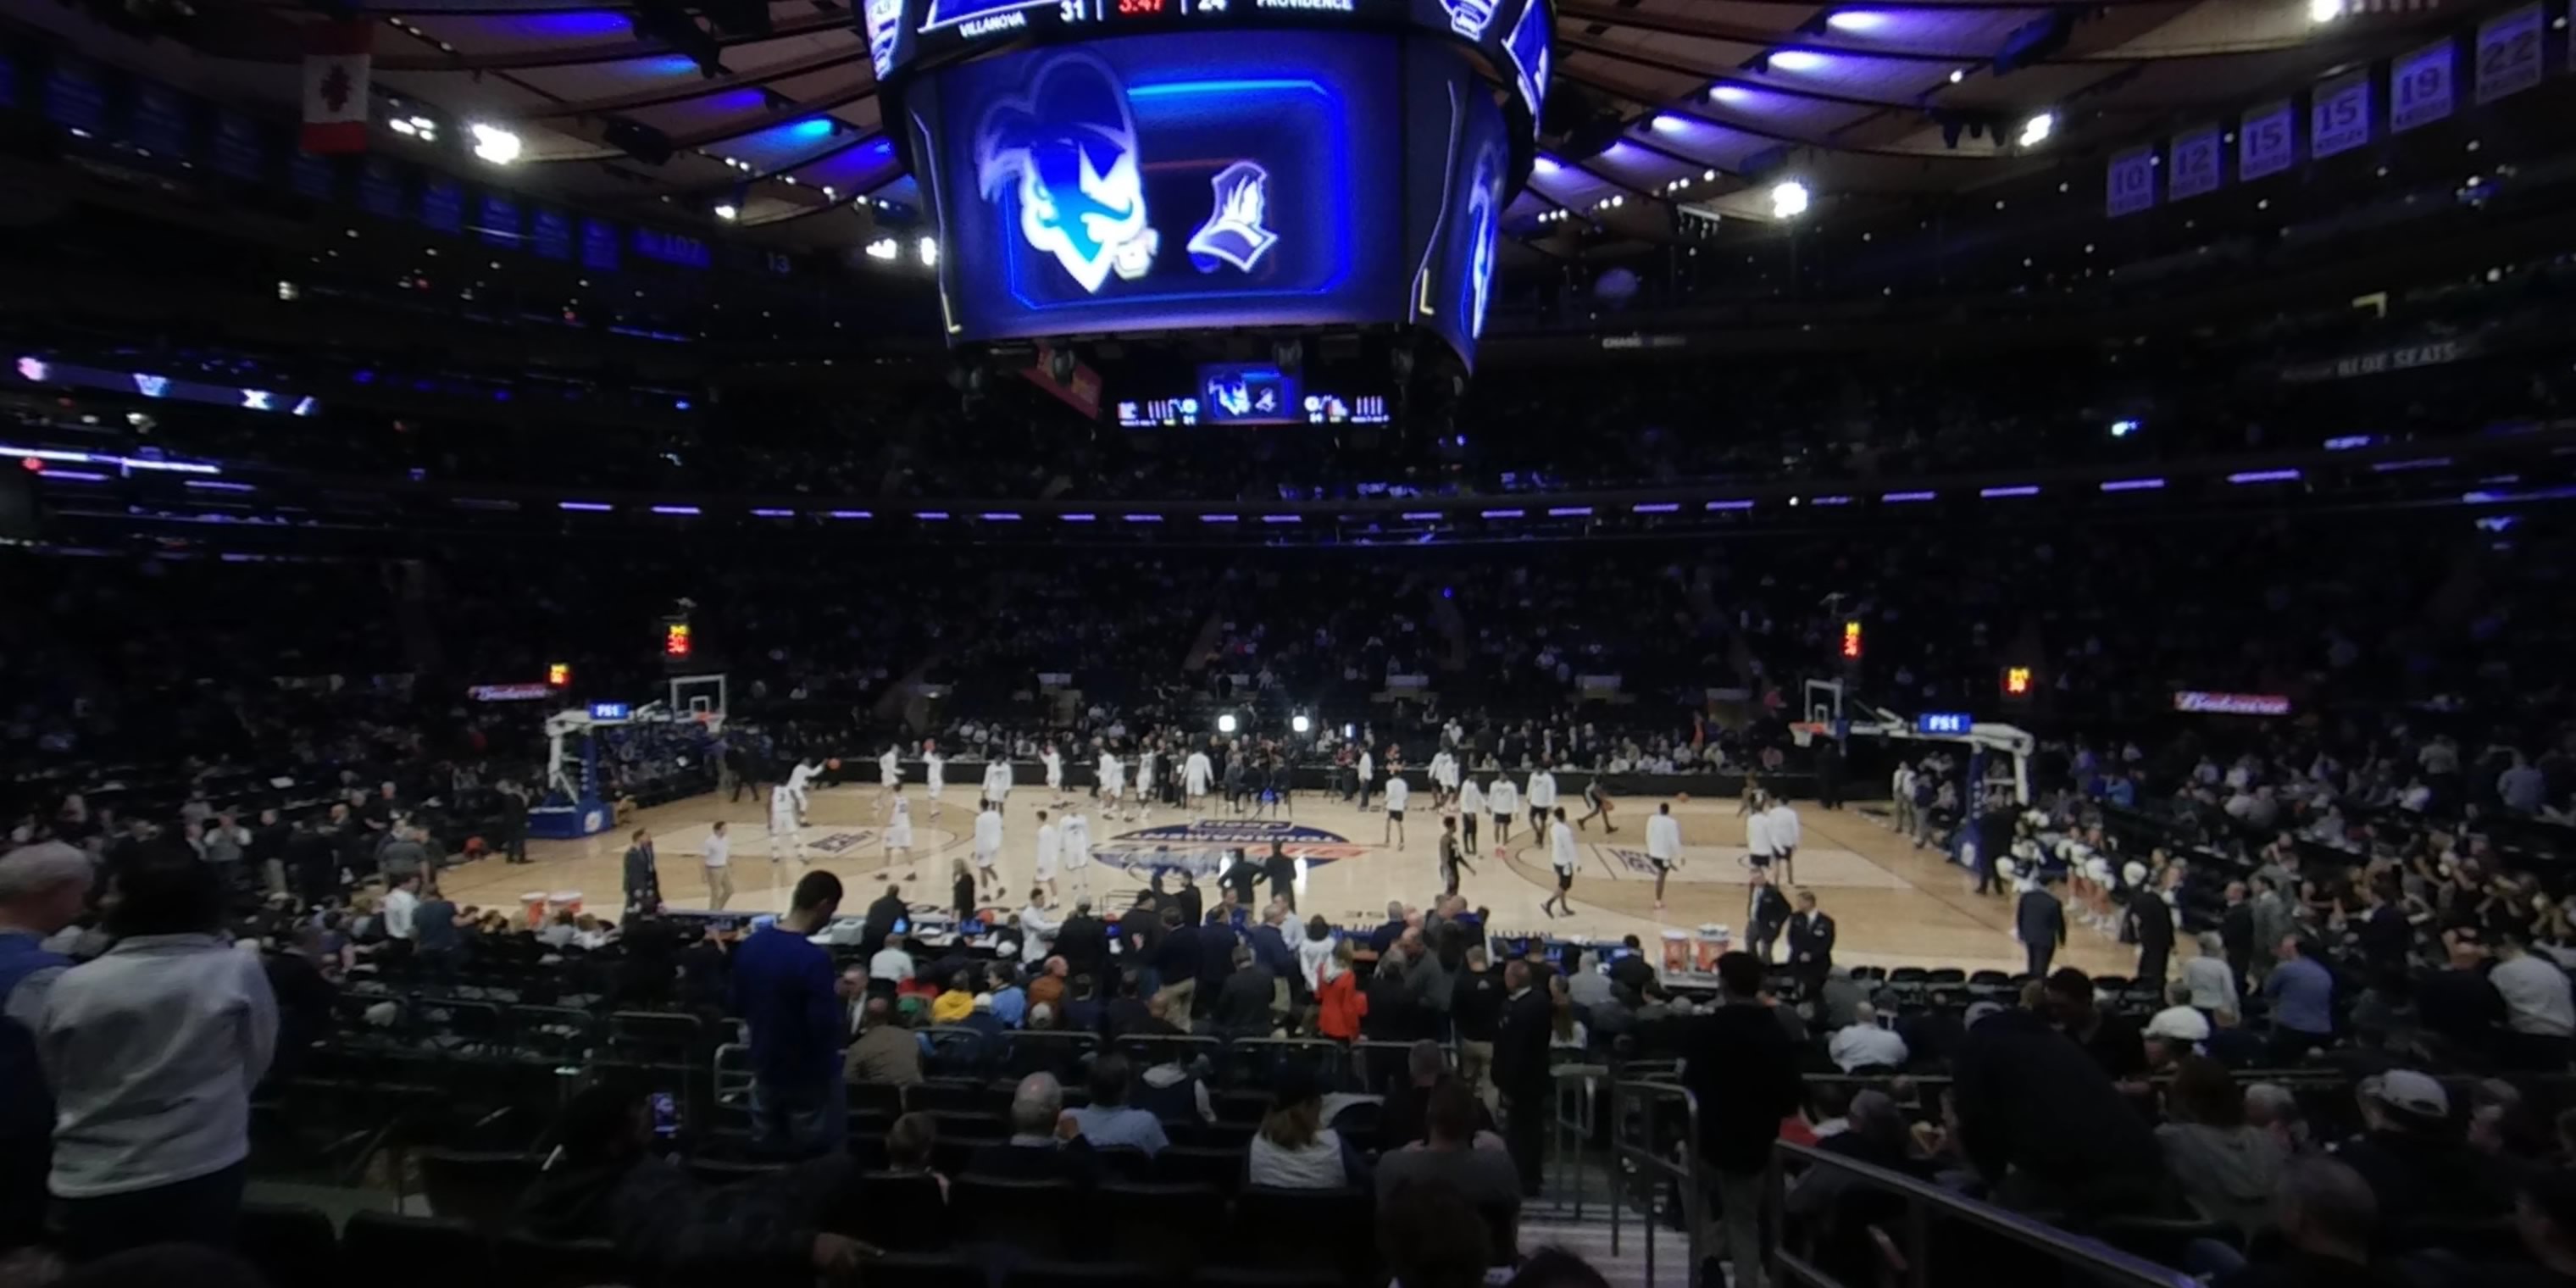 section 107 panoramic seat view  for basketball - madison square garden